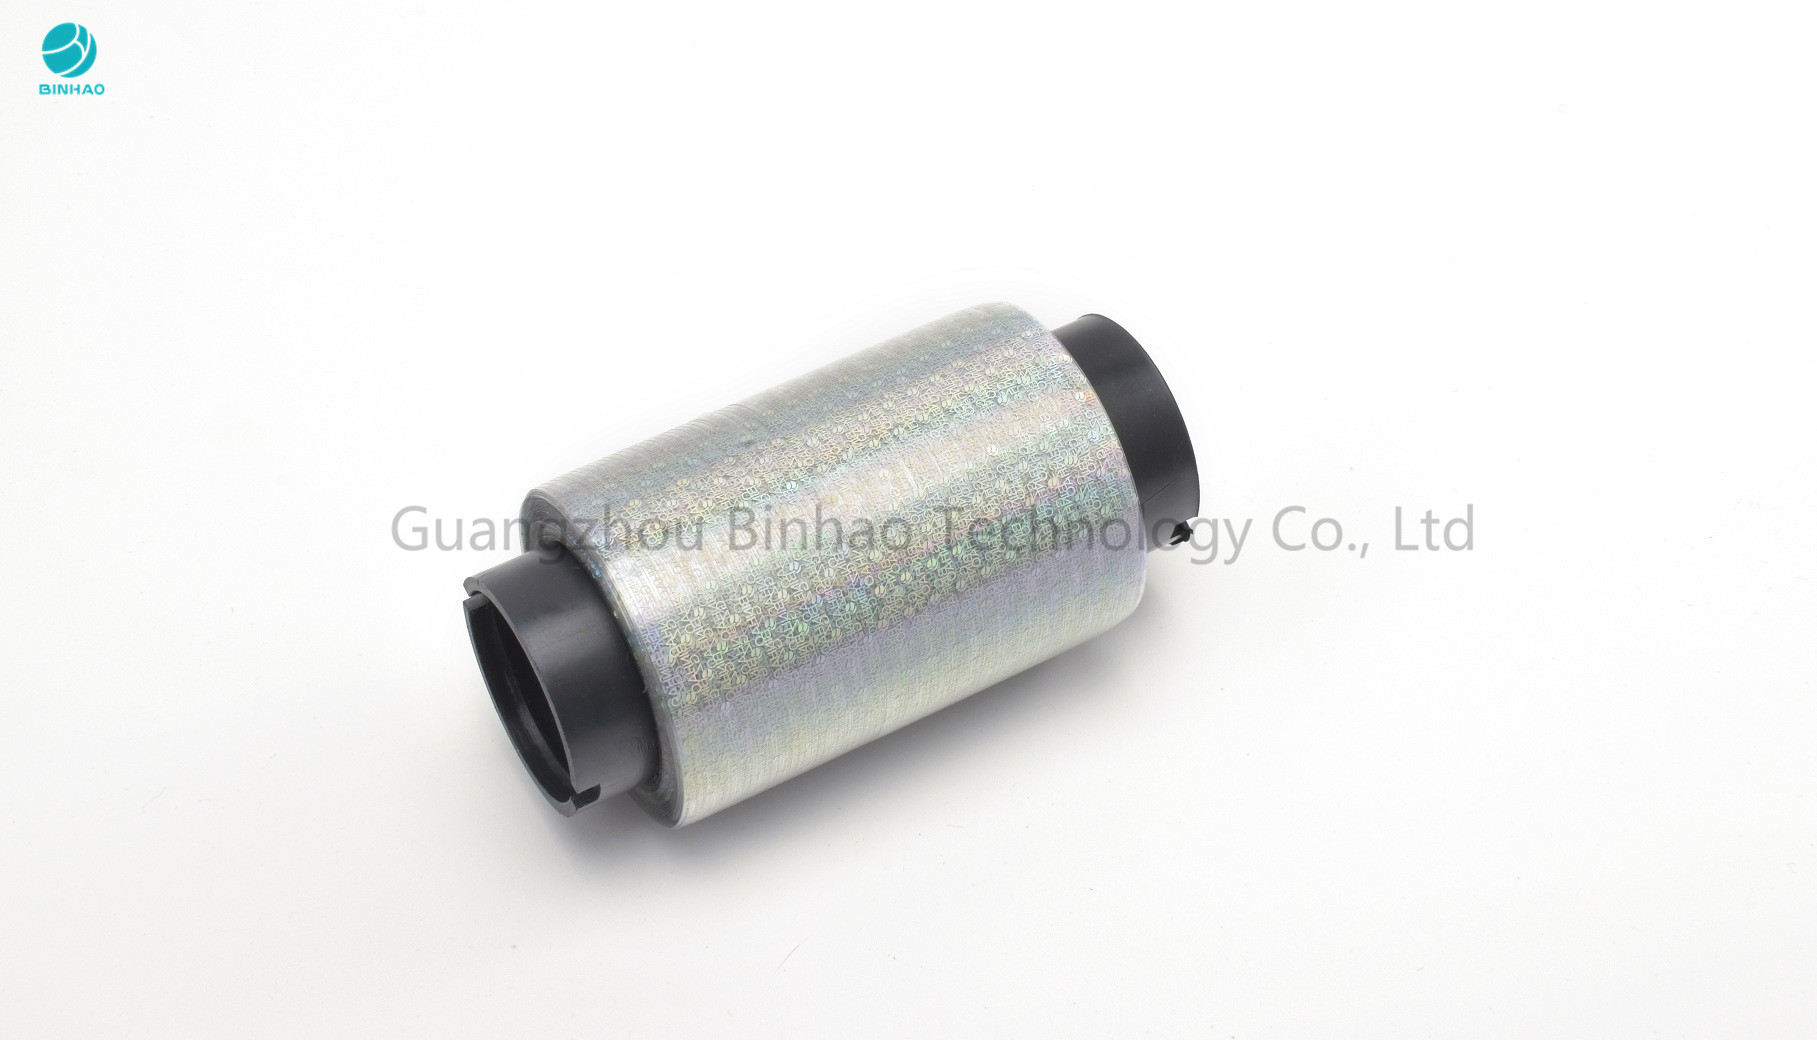 Waterproof Self Adhesive Tobacco Tear Tape 2.5mm Holographic PET Material For Packing Box